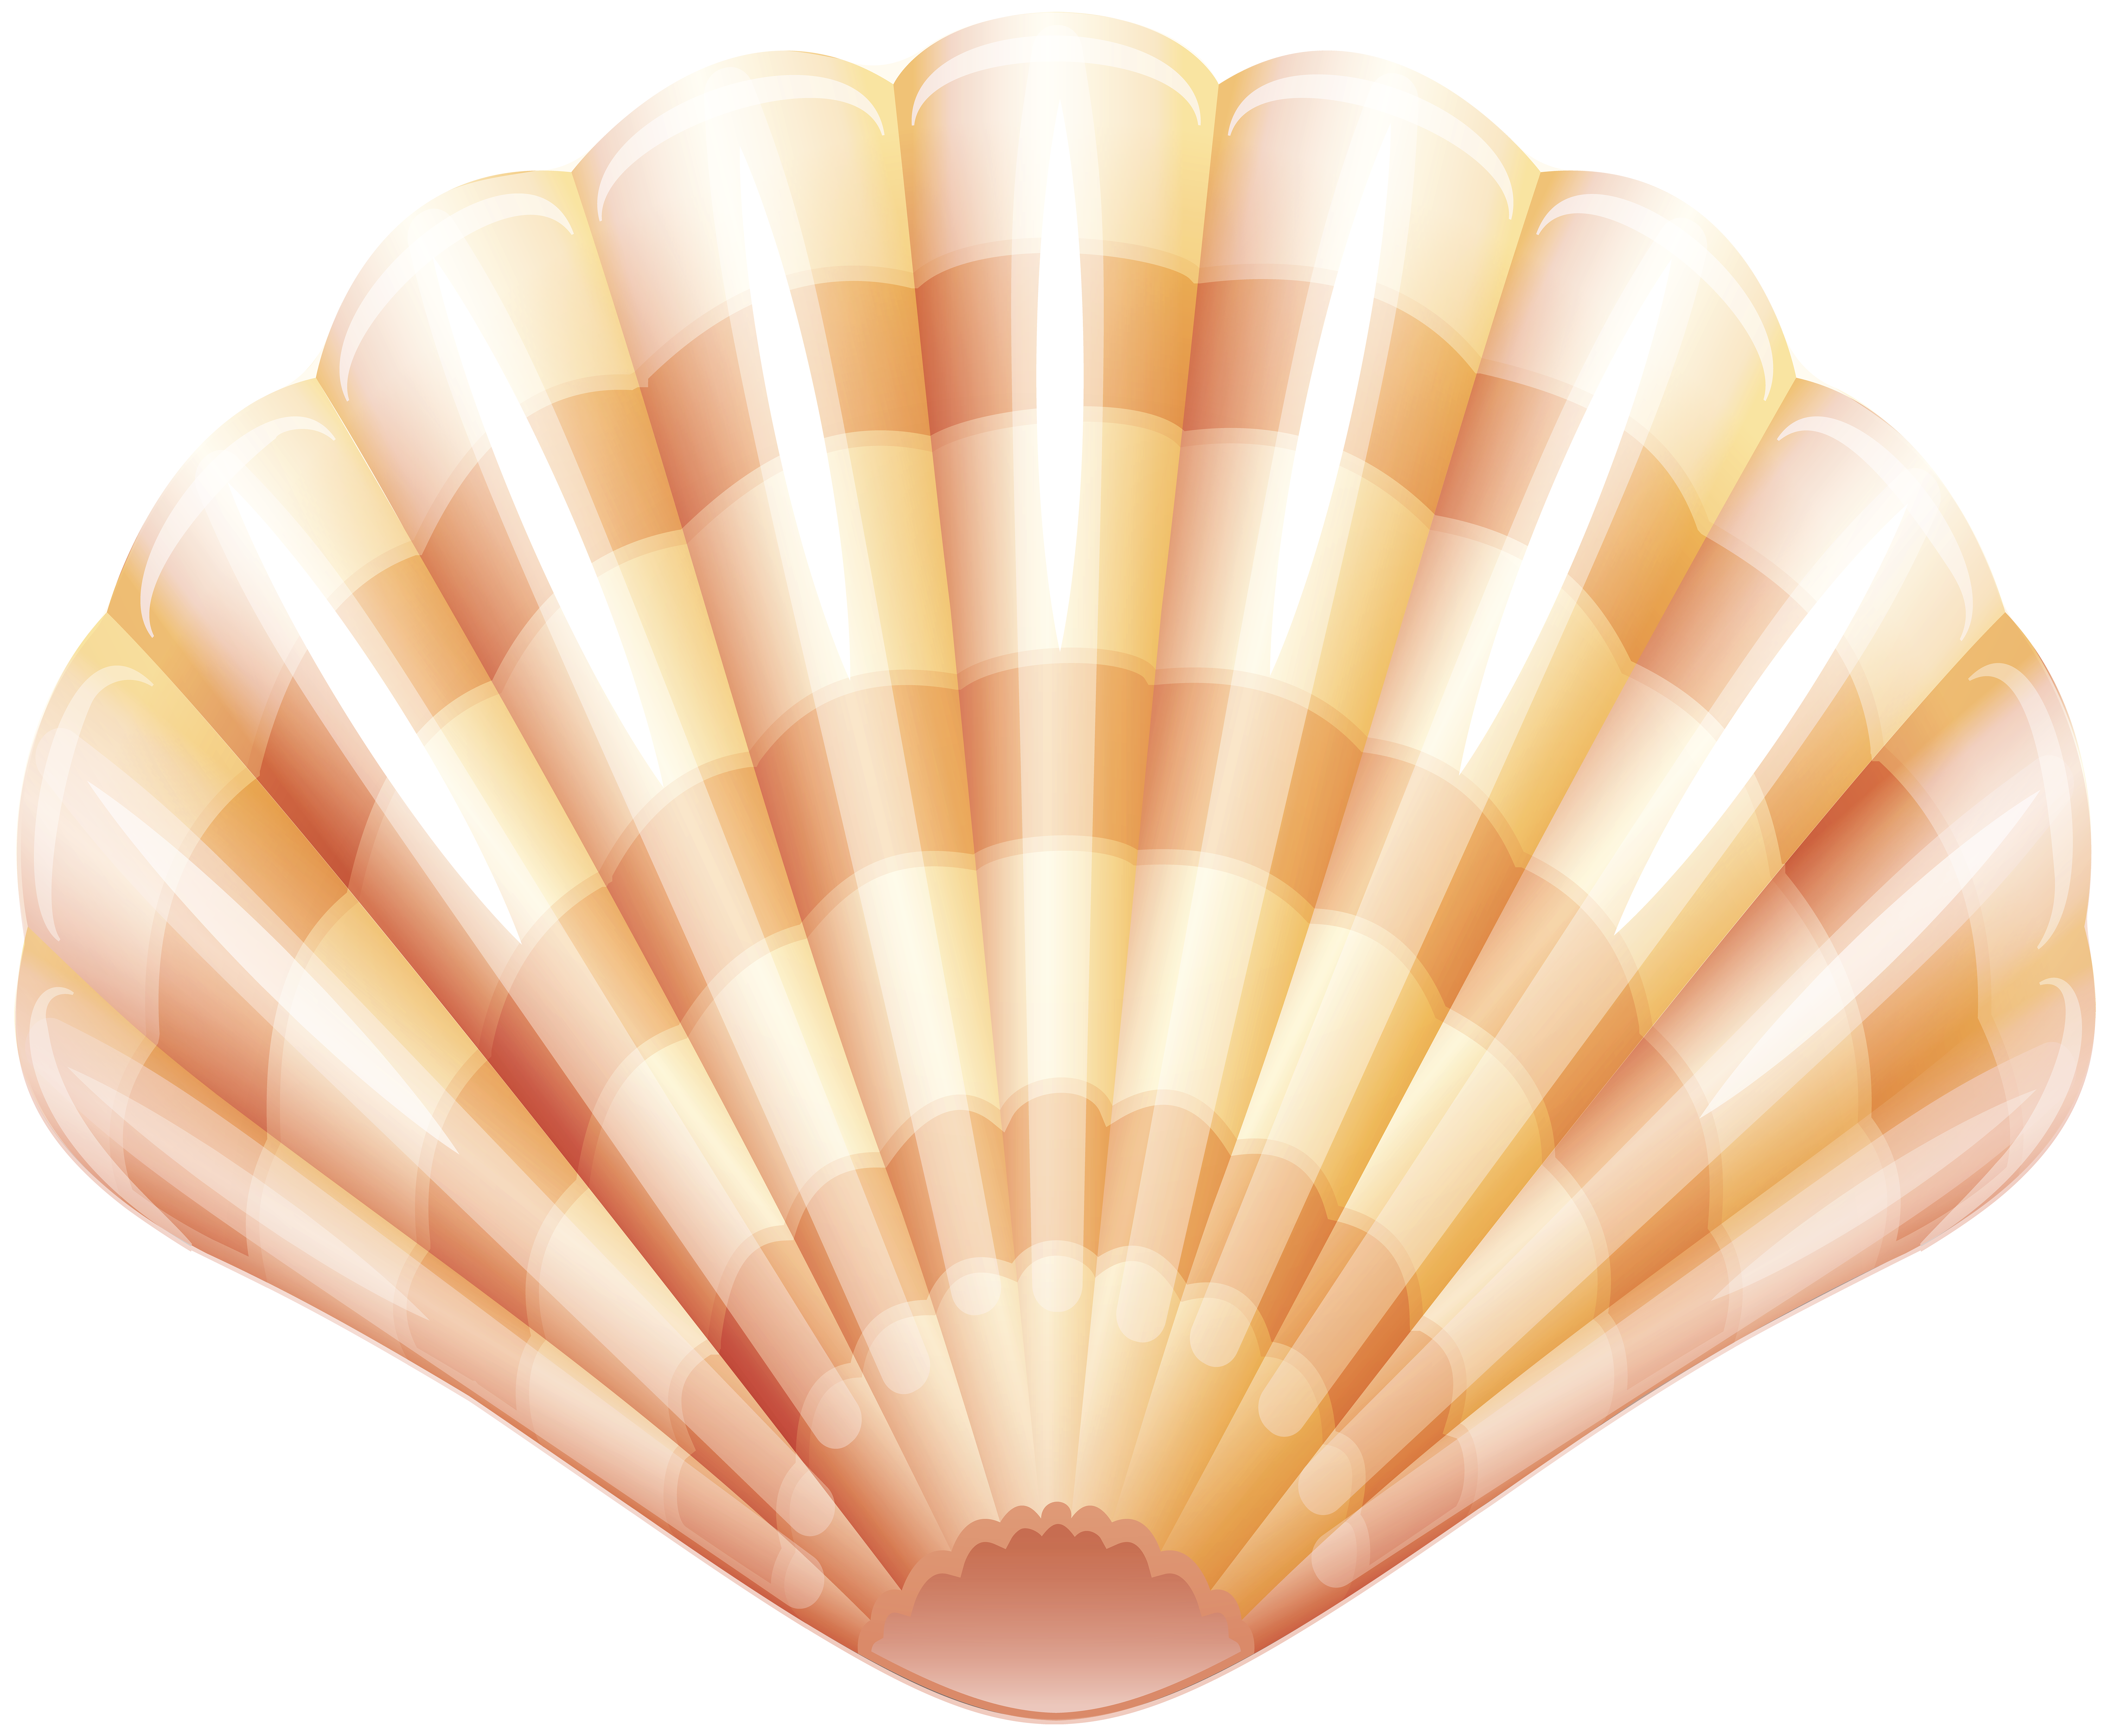 Clam clipart shell fish. Seafood lobster shellfish mussel